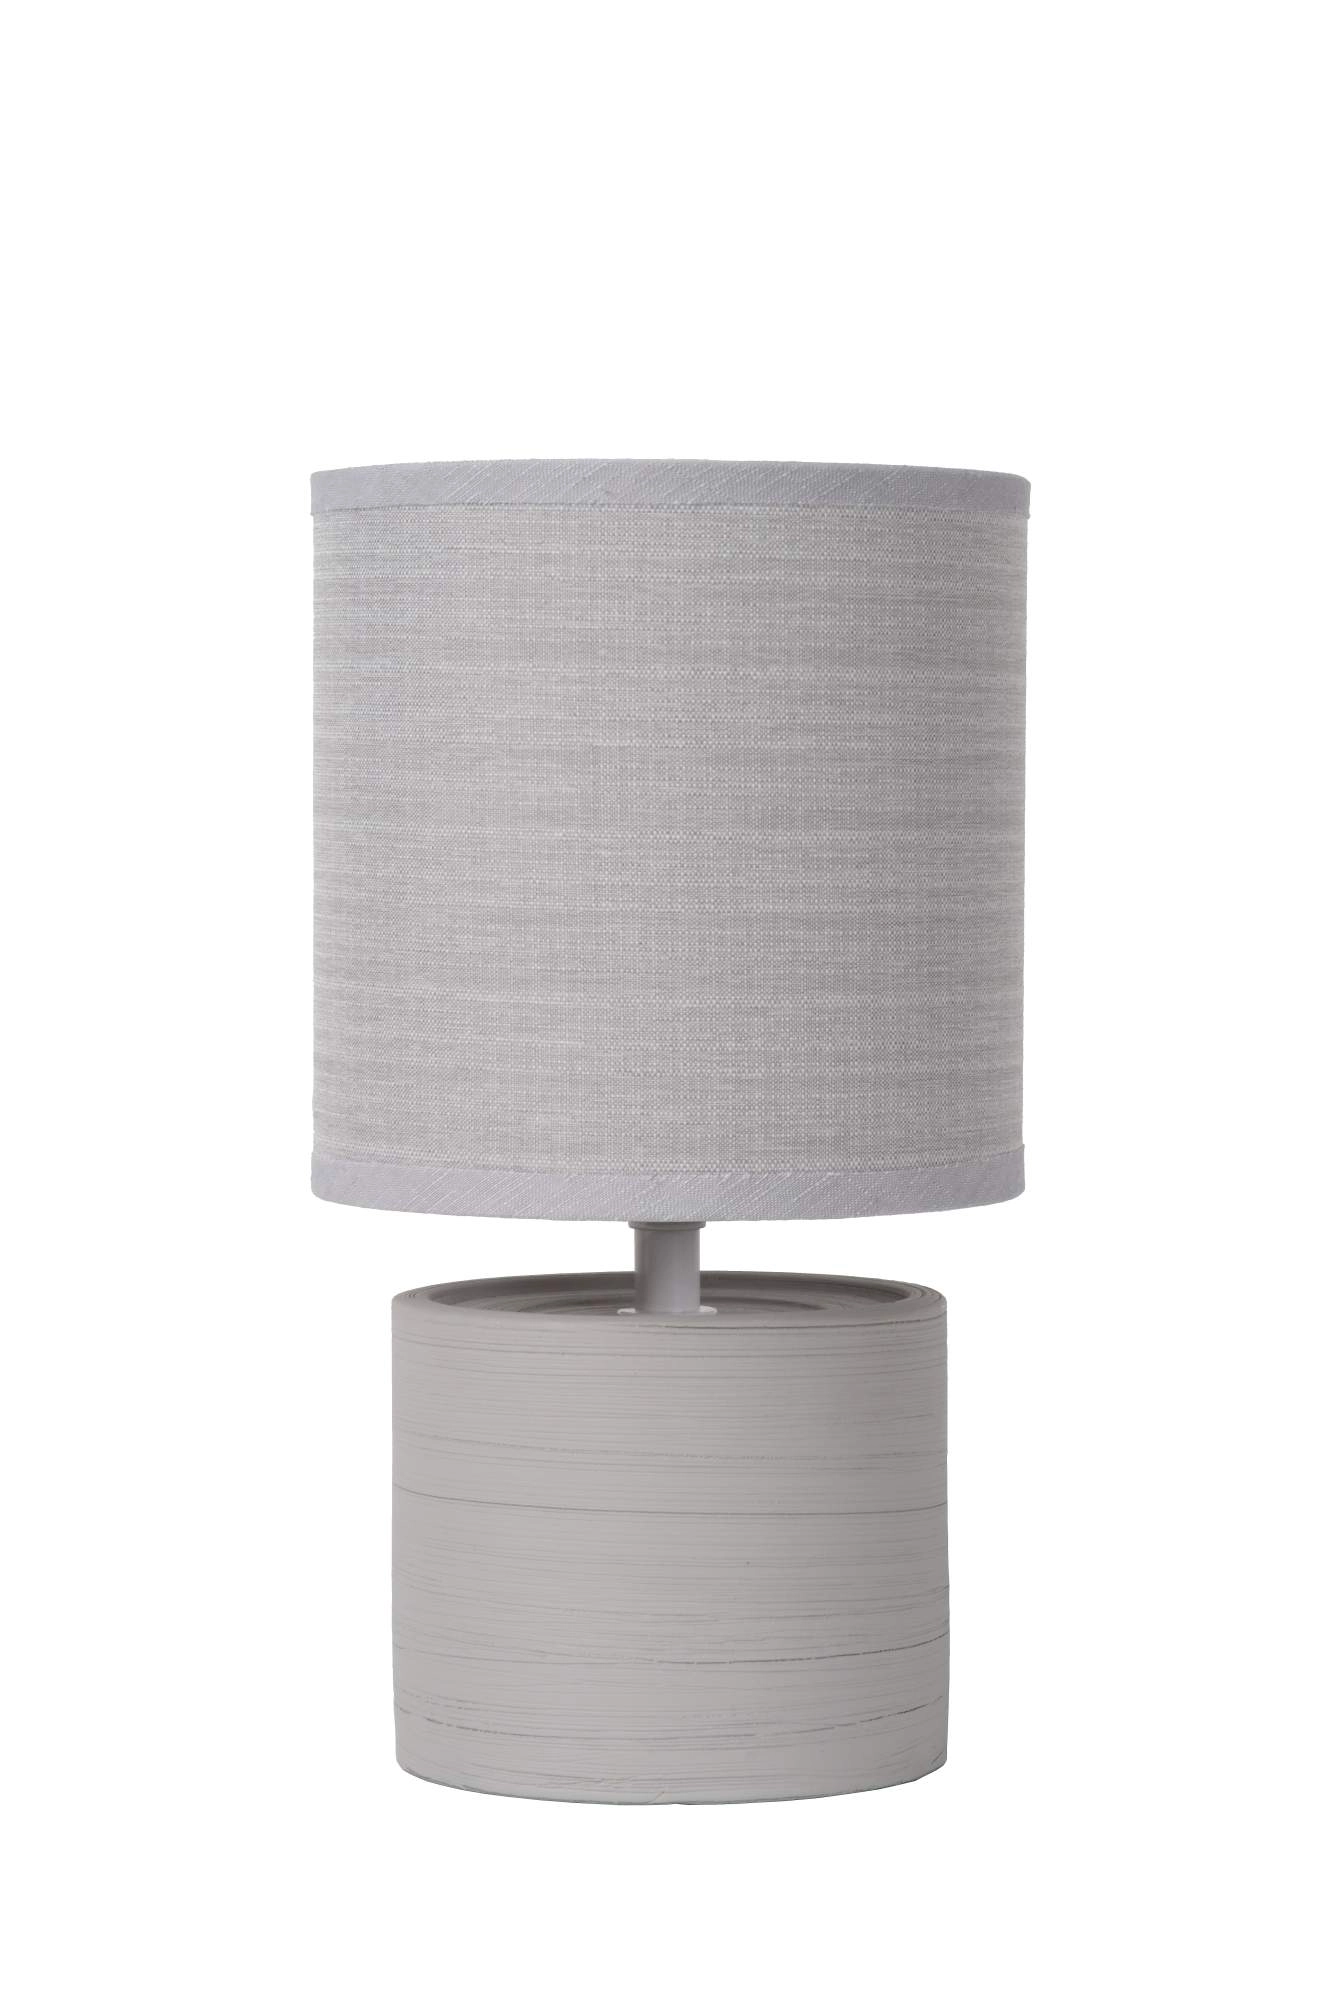 LU 47502/81/36 Lucide GREASBY - Table lamp - Ø 14 cm - 1xE14 - Grey